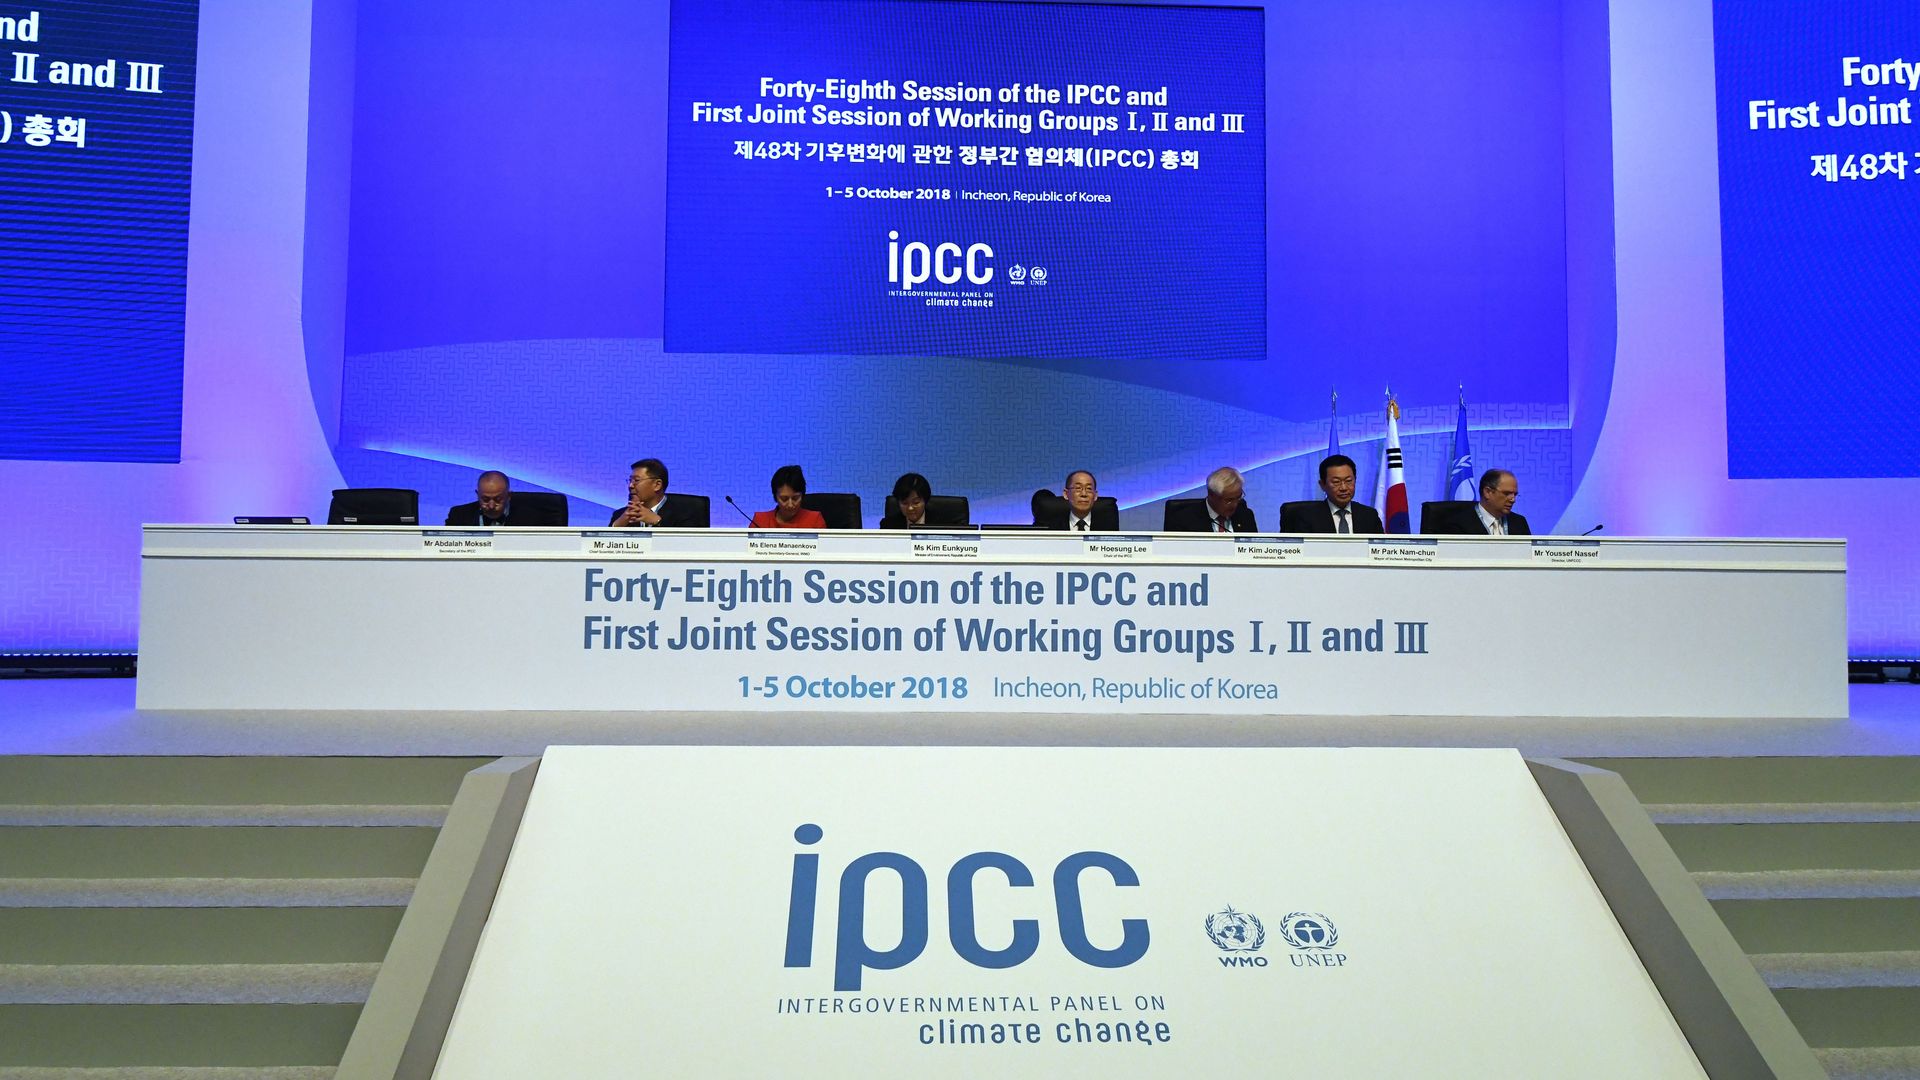 A meeting of the Intergovernmental Panel on Climate Change